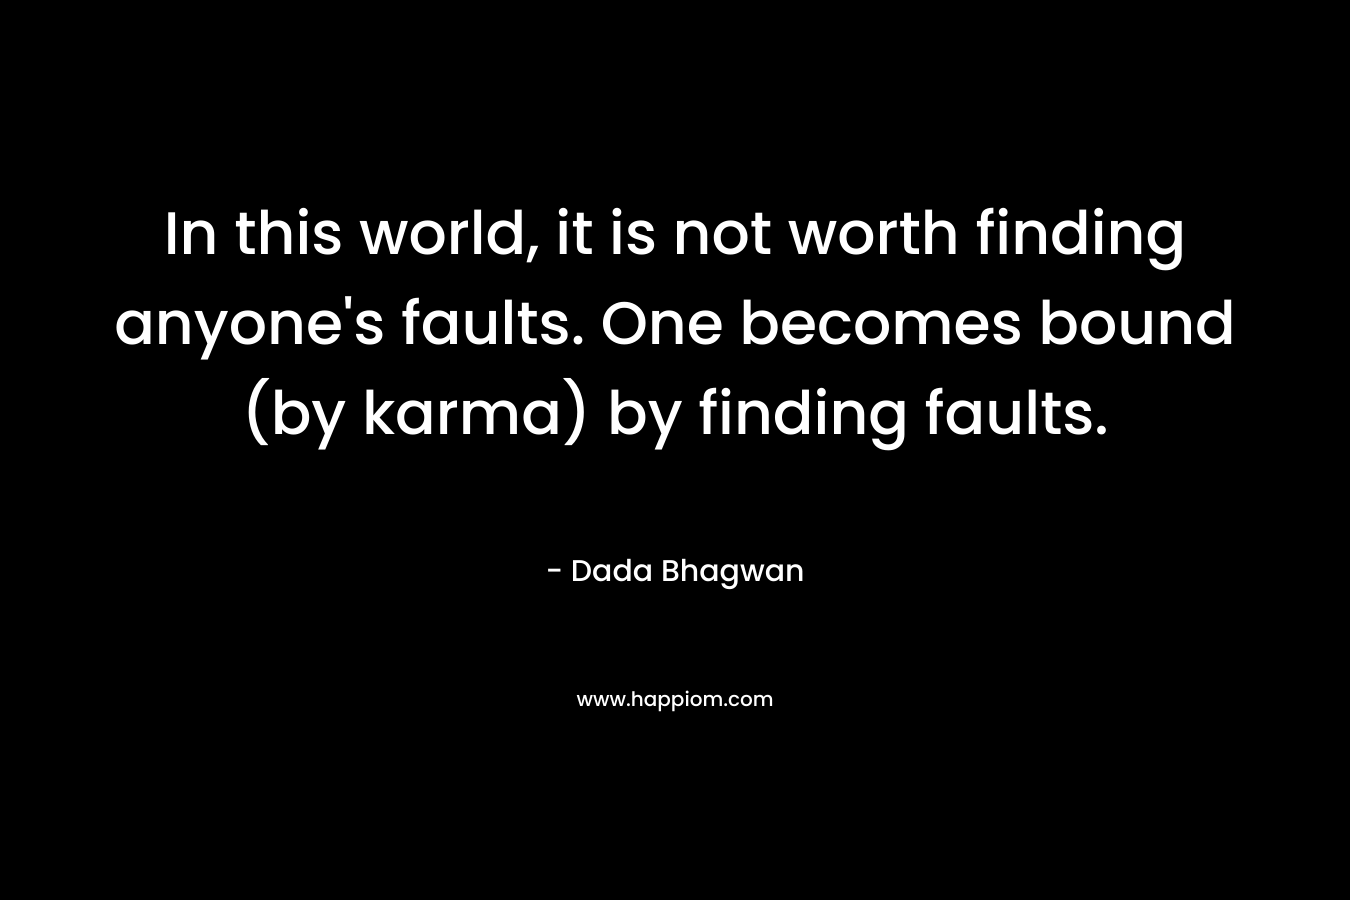 In this world, it is not worth finding anyone's faults. One becomes bound (by karma) by finding faults.